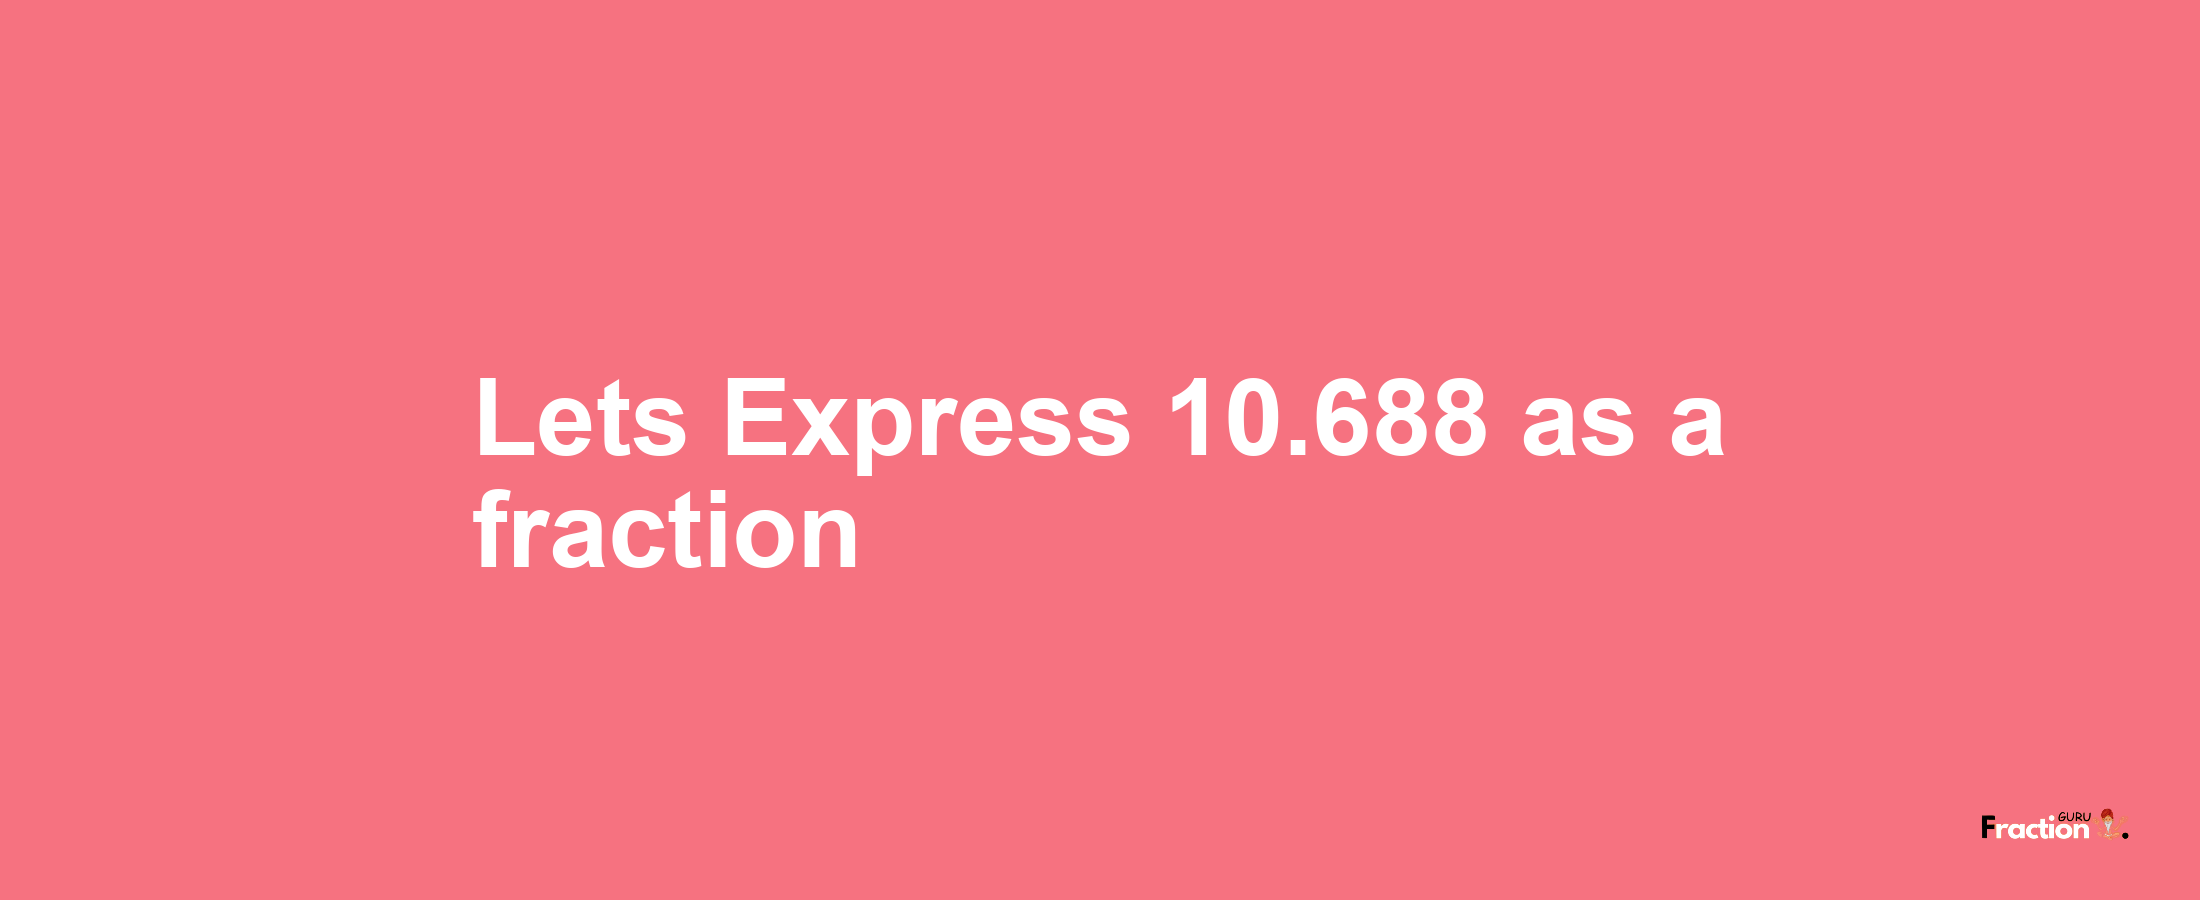 Lets Express 10.688 as afraction